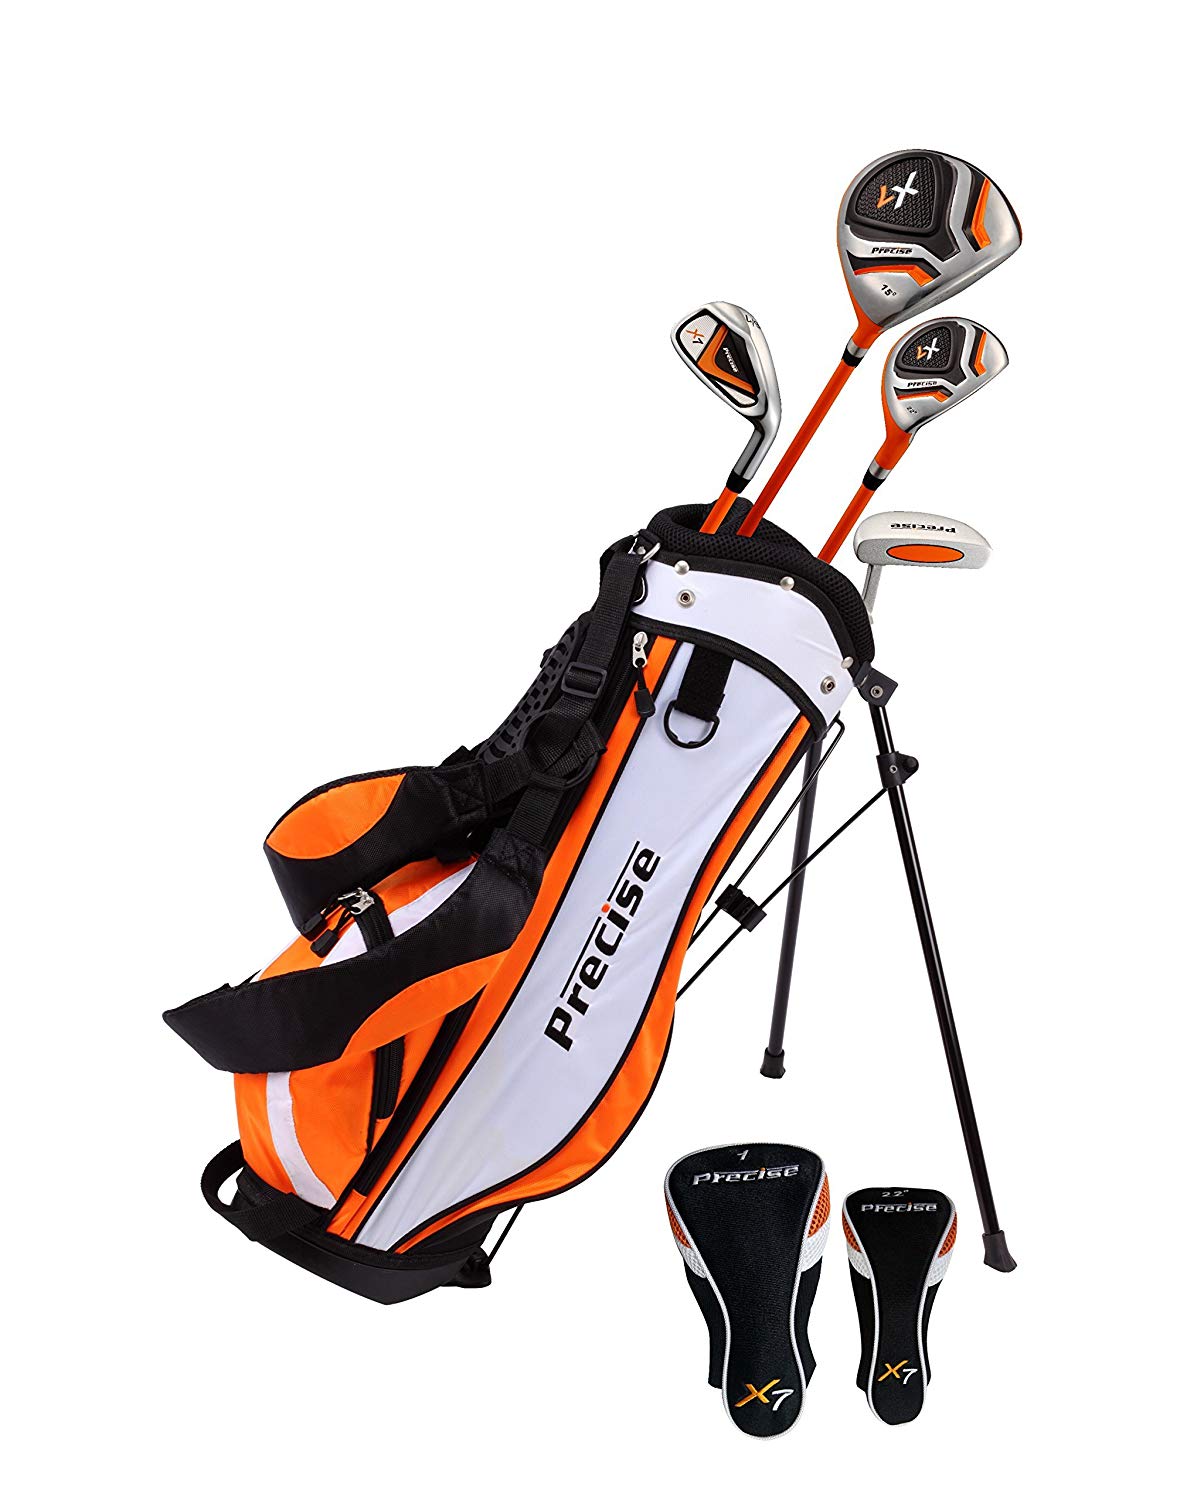 Precise X7 junior golf clubs for ages 3-12